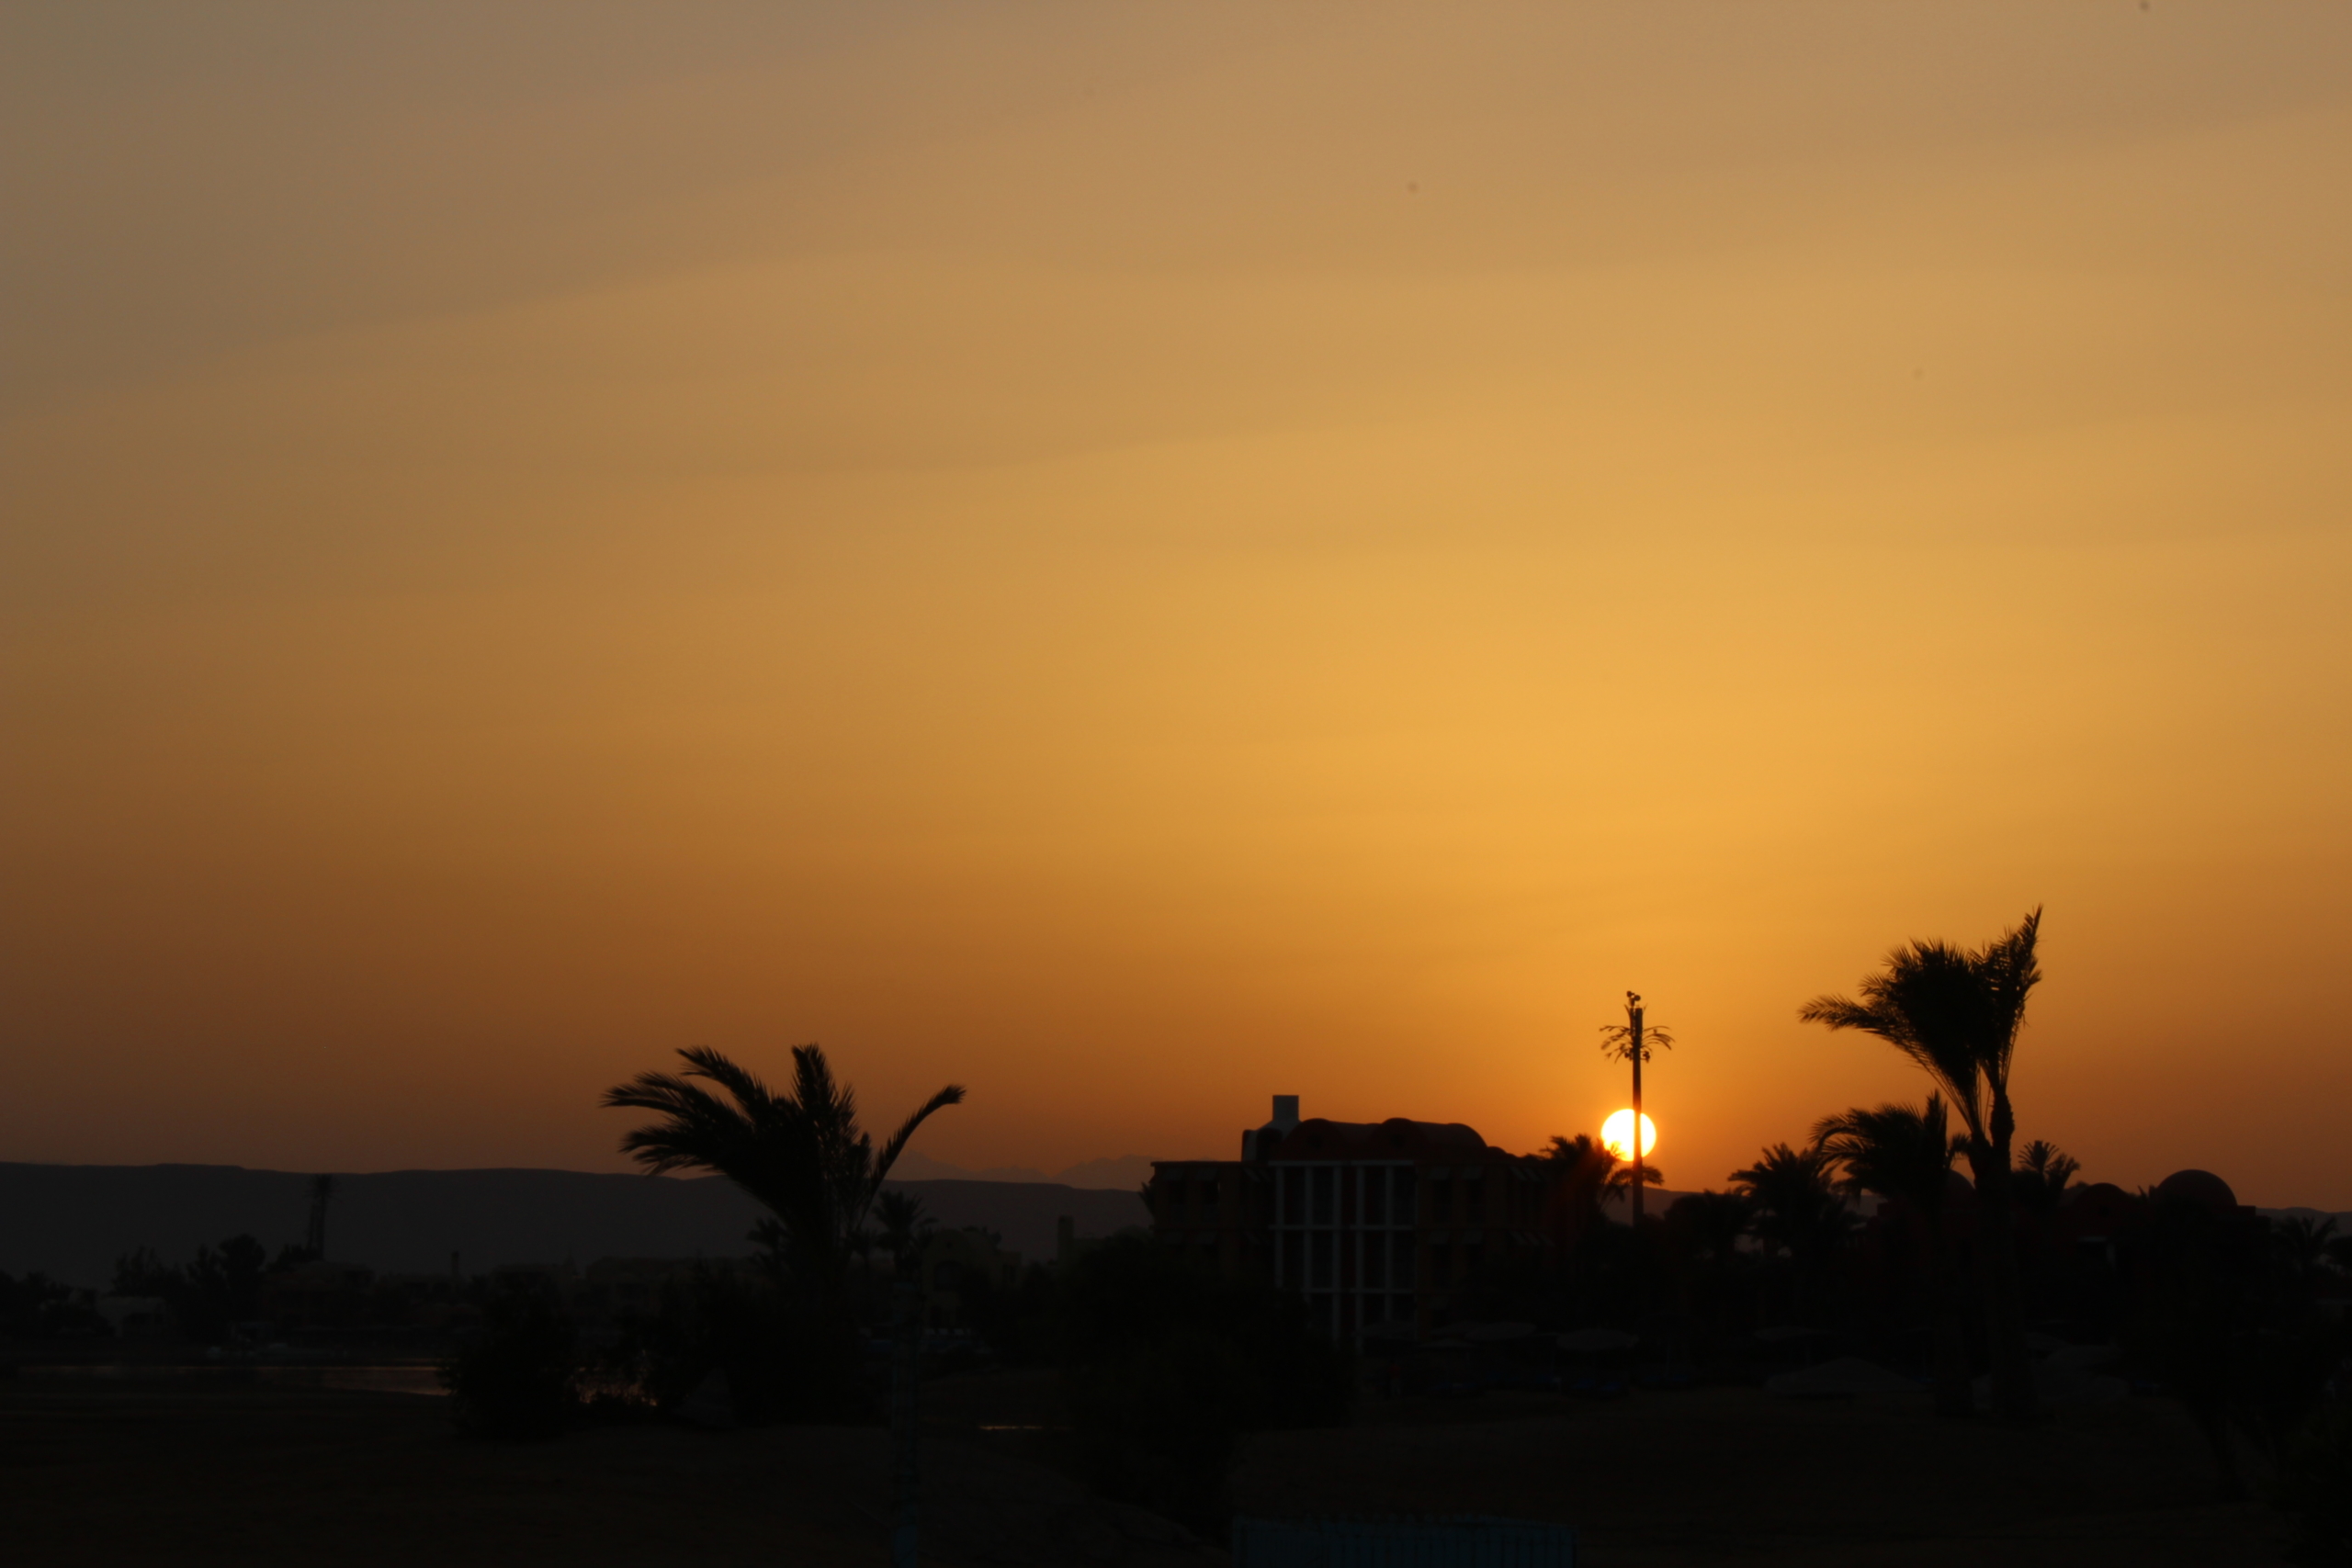 El Gouna sunset with palm trees silhouetted